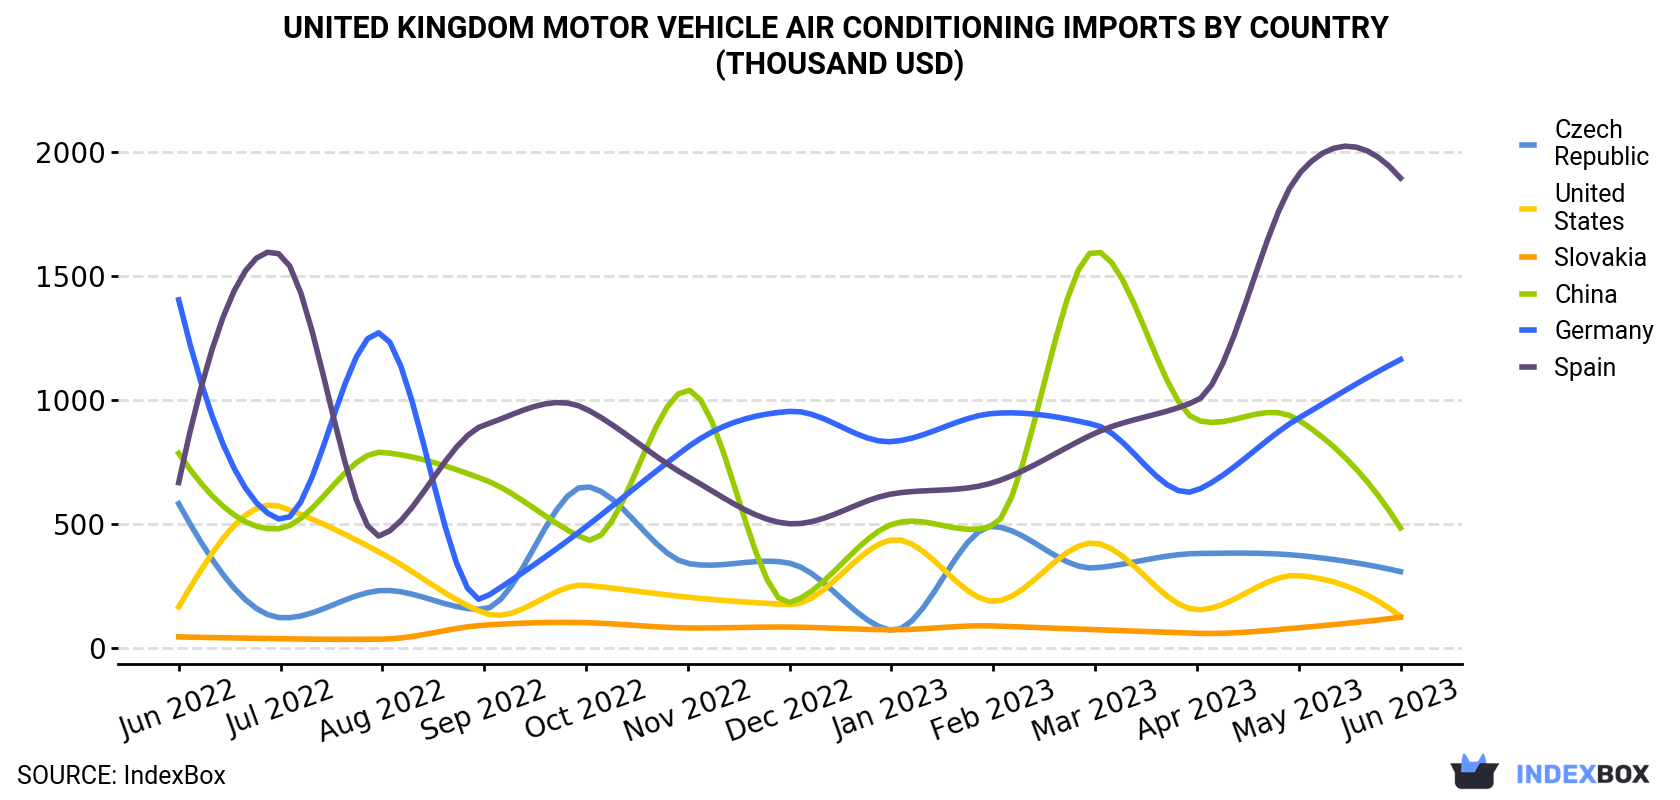 United Kingdom Motor Vehicle Air Conditioning Imports By Country (Thousand USD)